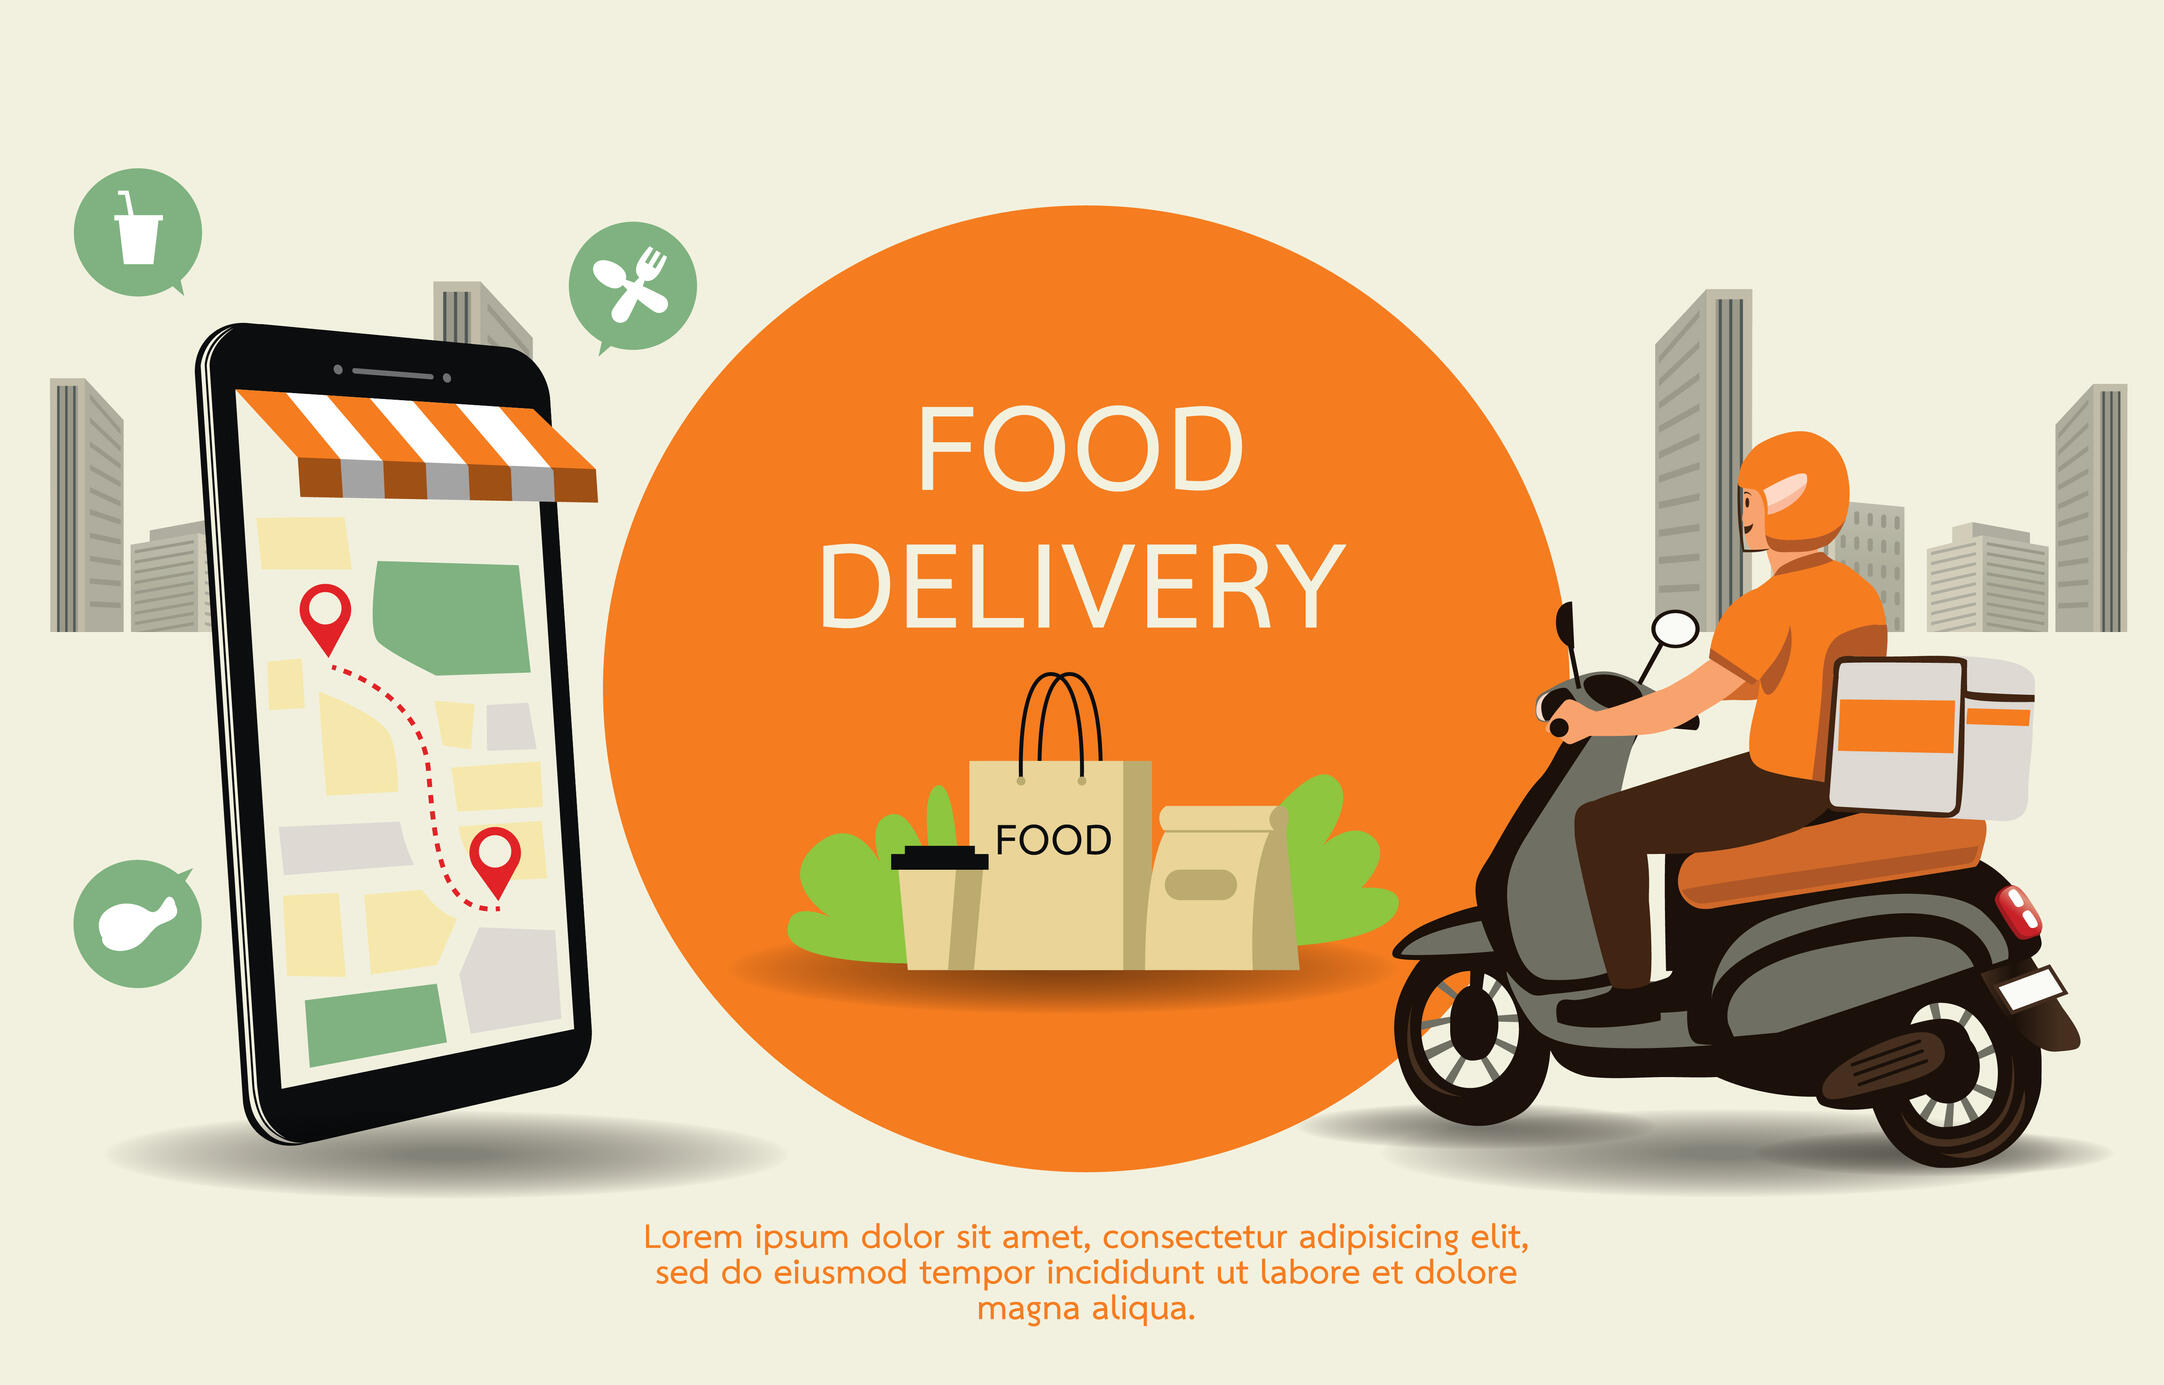 An illustration of a man on a moped next to a circle that says \"FOOD DELIVERY\" inside of it. To the far left is an illustration of a smart phone with a map on it. 